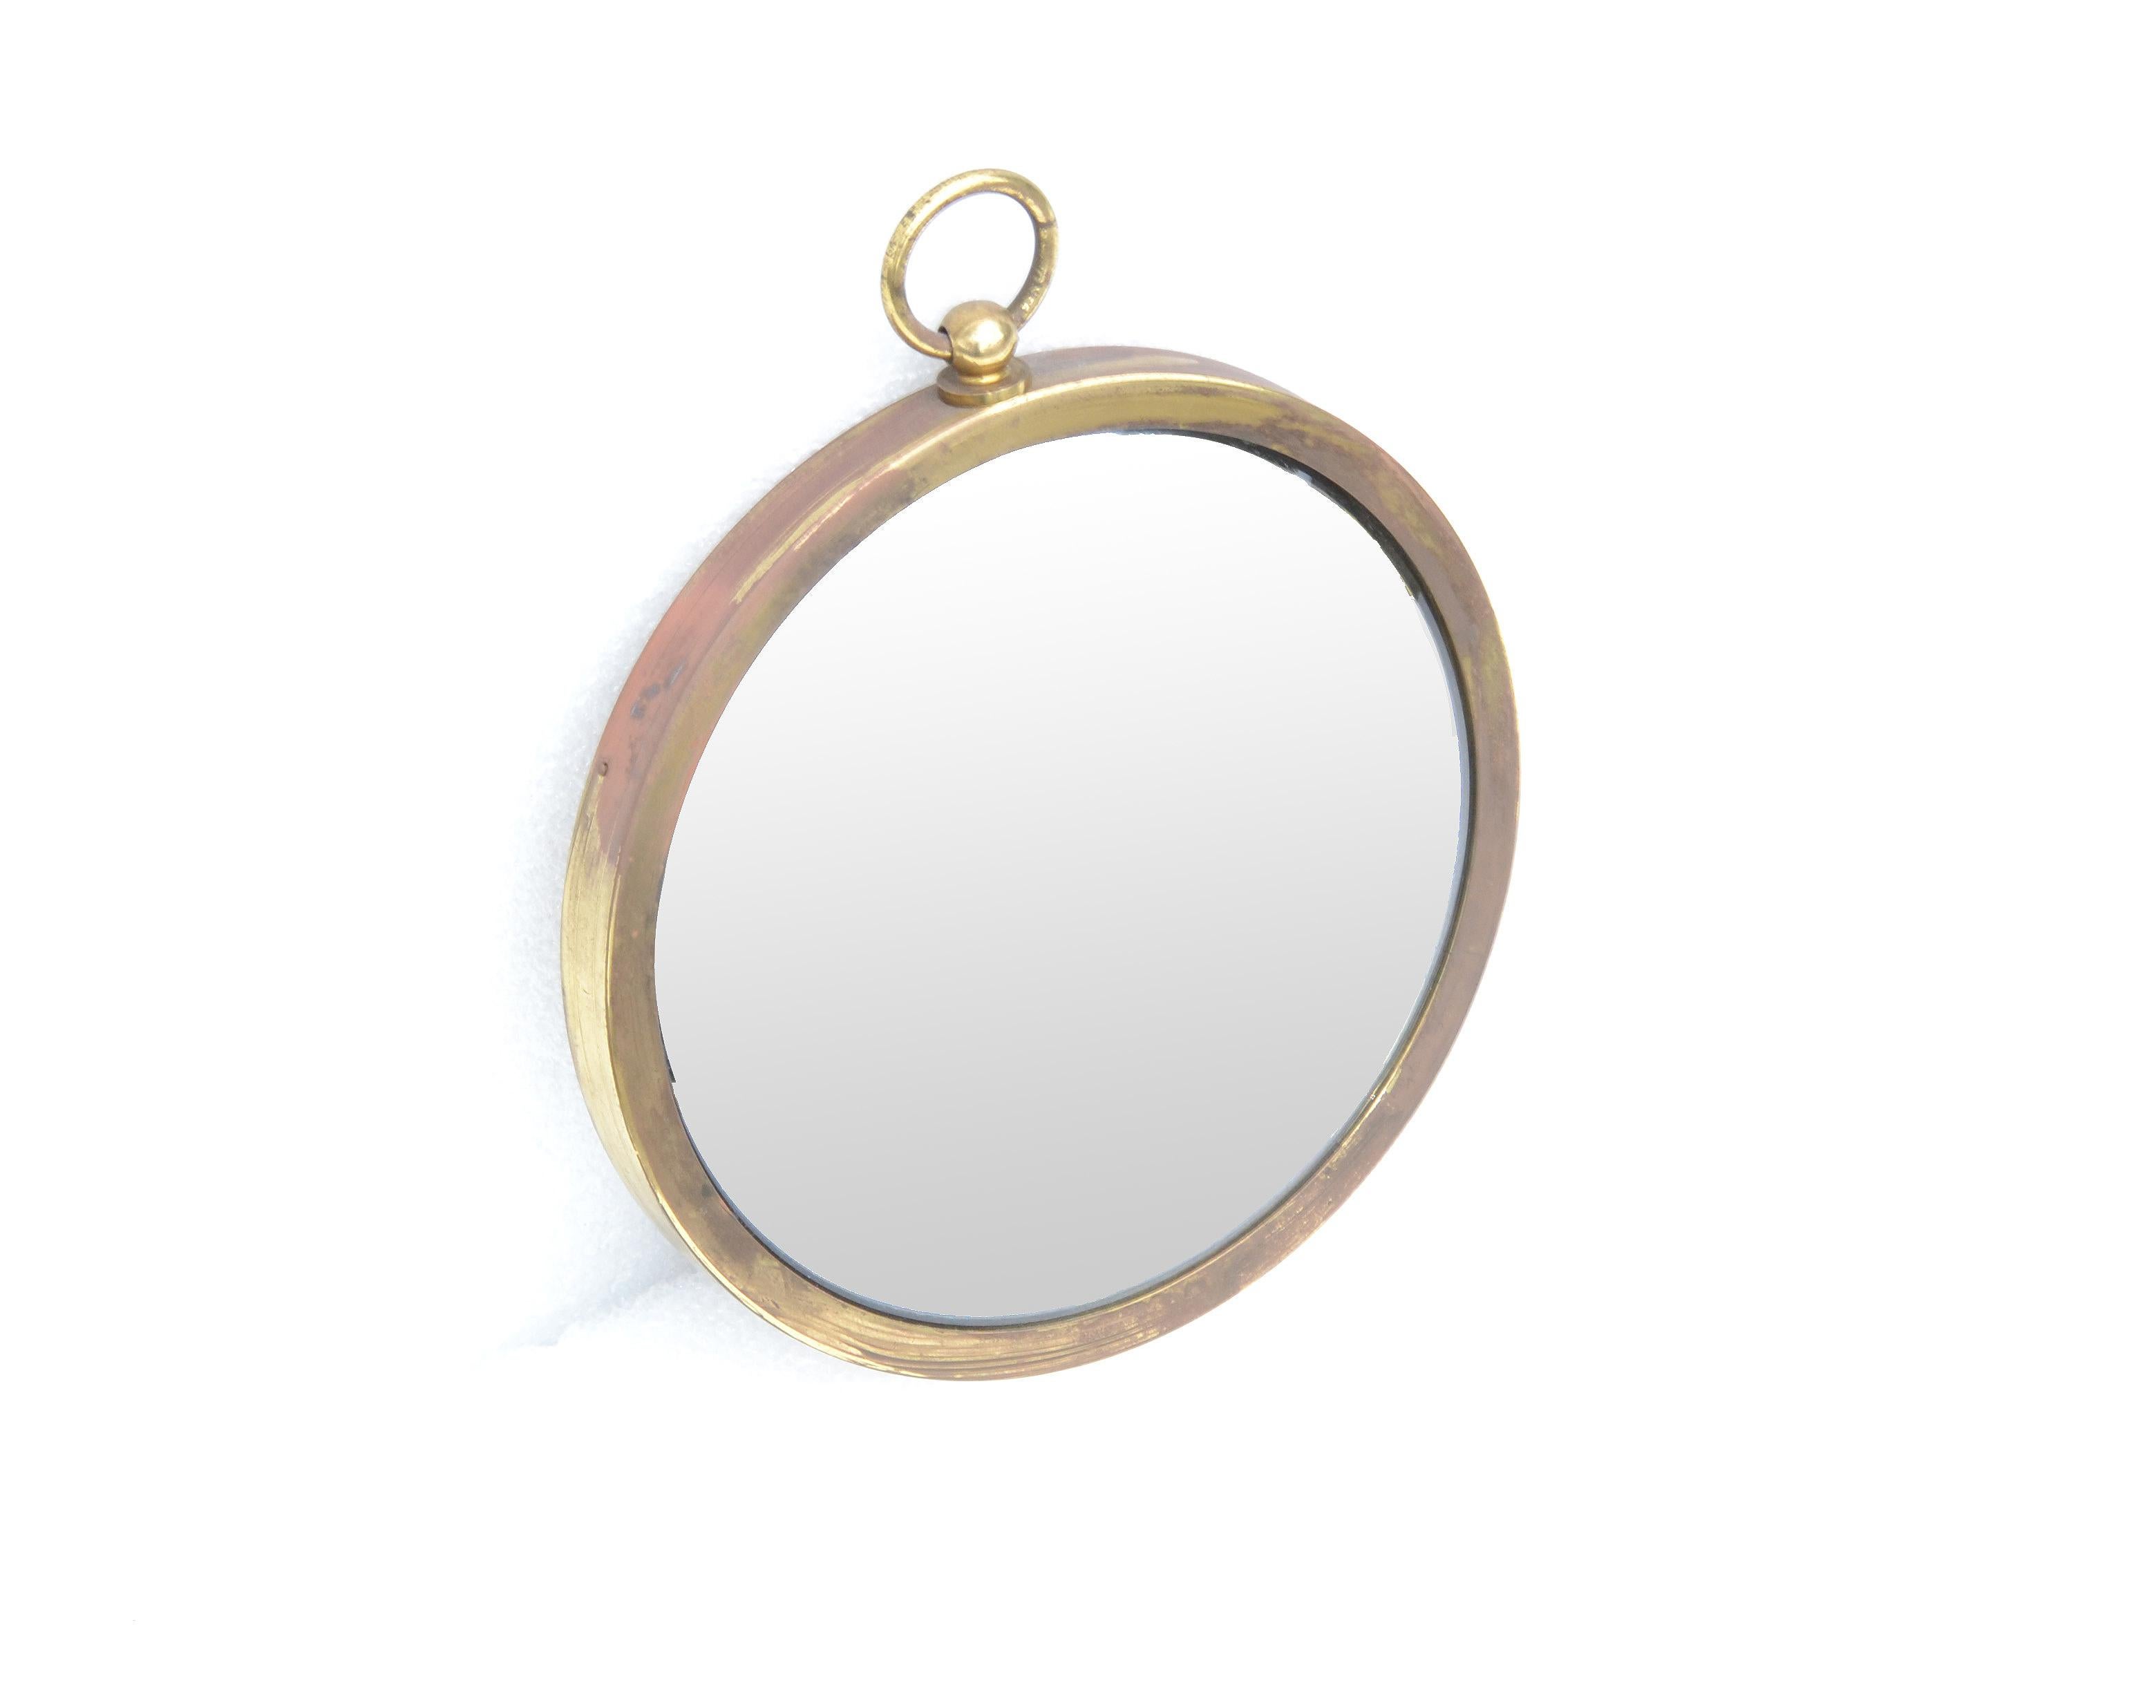 Jacque Adnet style French Mid-Century Modern wall convex mirror in patinated brass pocket watch shape.
Made in France in the late 1960s.
Can be polished & lacquered when desired a perfect look.
Round mirror glass measures 7.25 inches diameter.